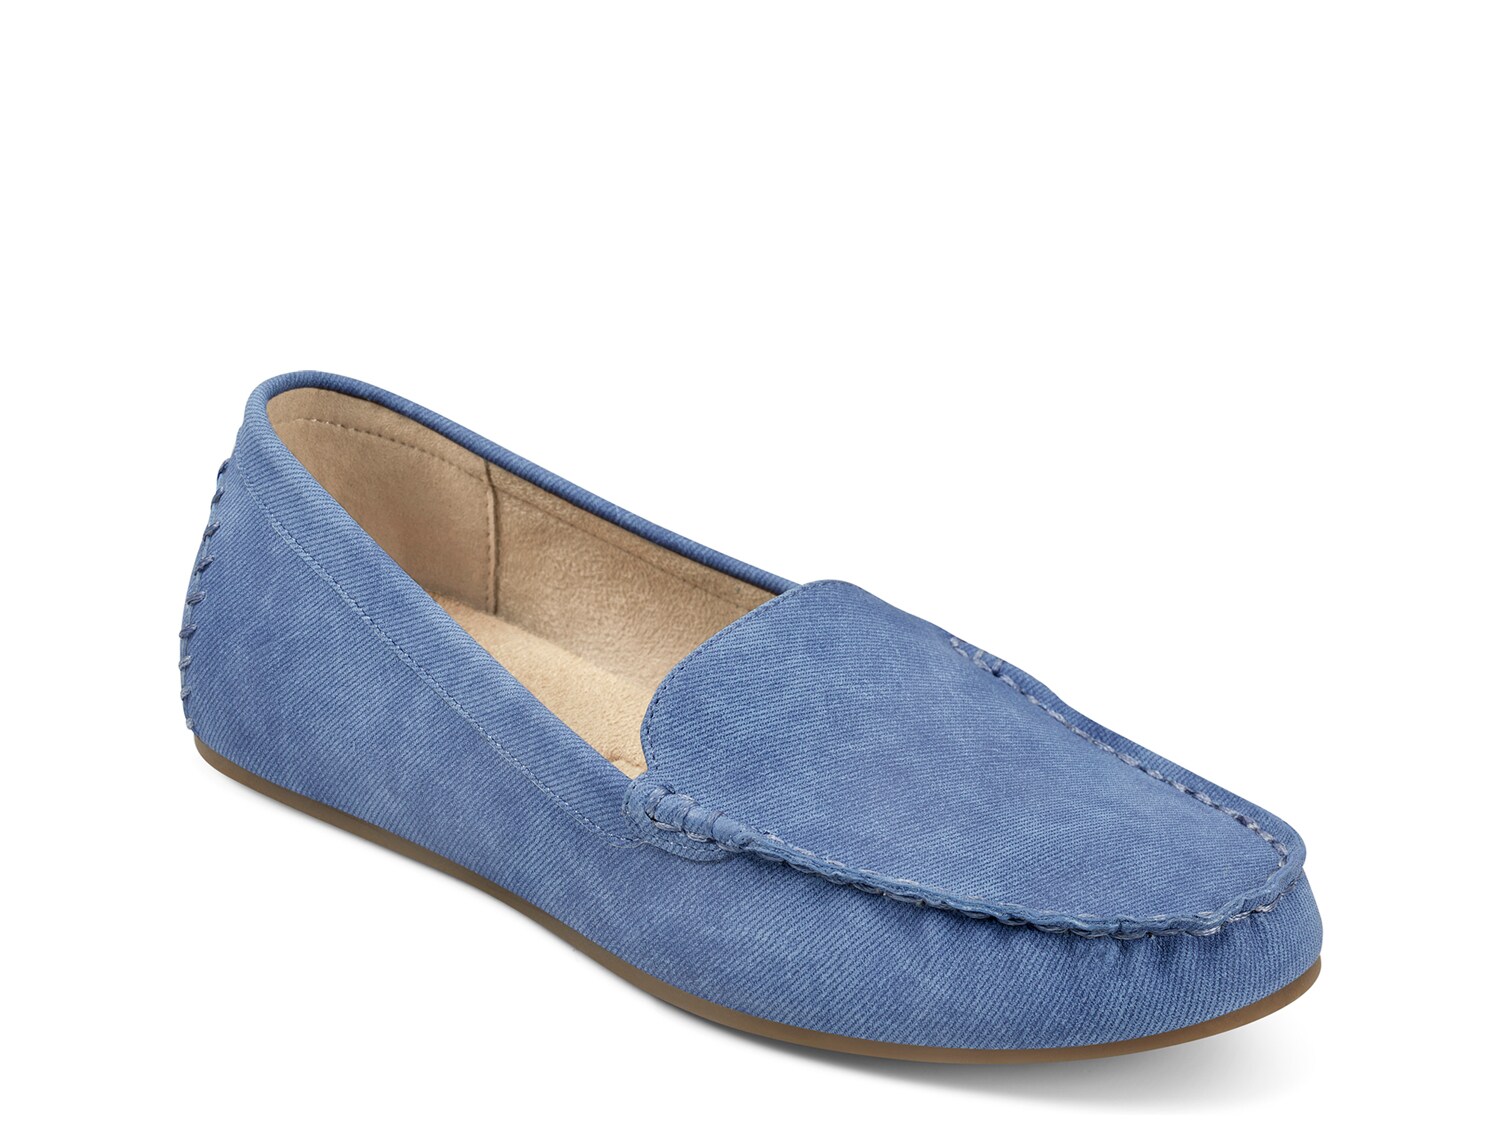 Aerosoles Overdrive Loafer - Free Shipping | DSW